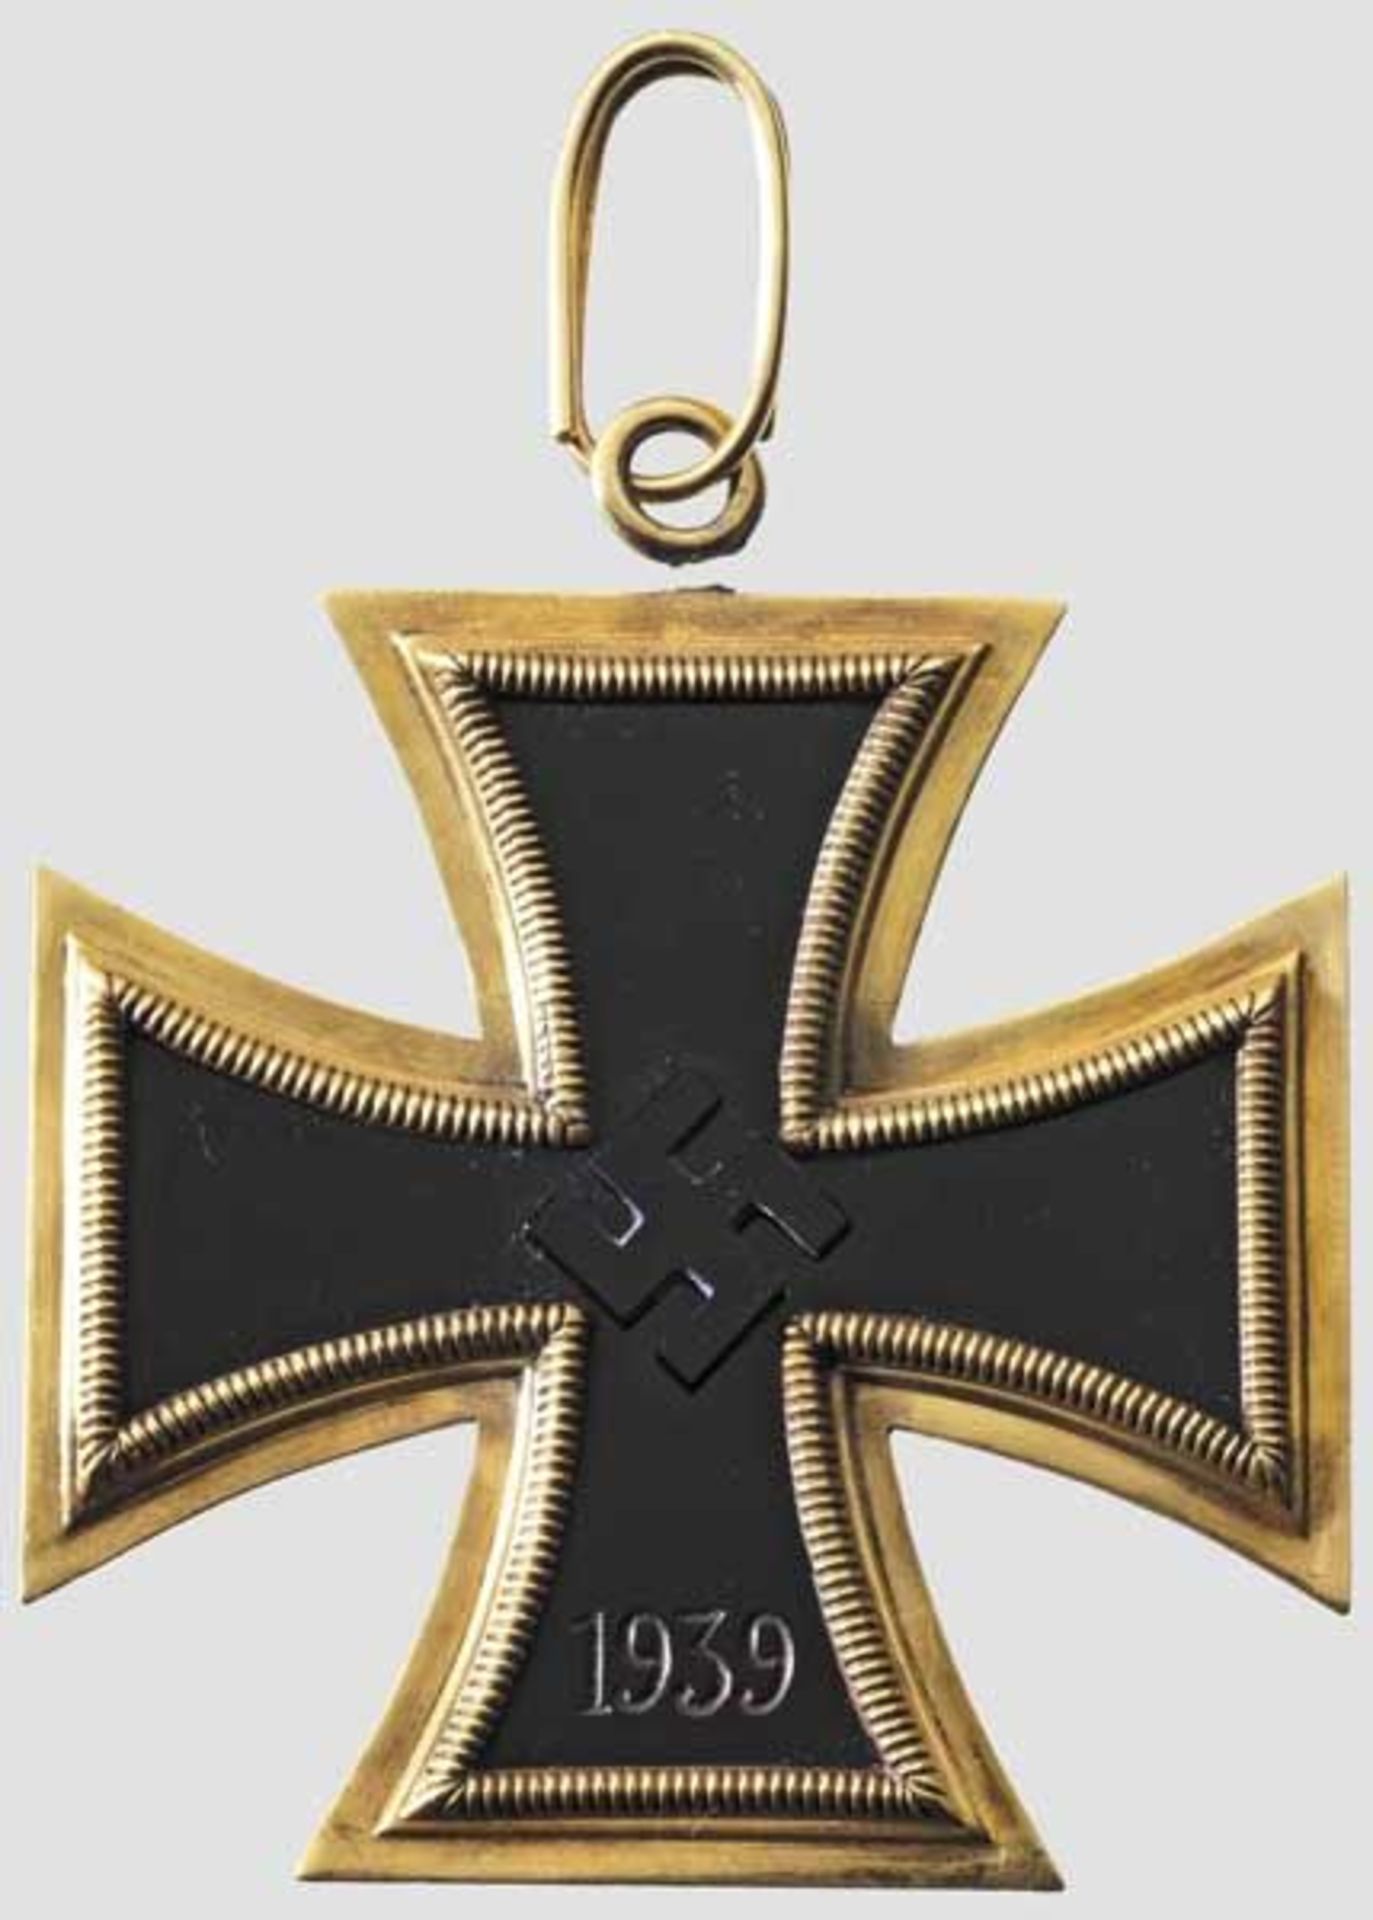 J. Godet & Son - a Grand Cross of the Iron Cross of 1939 in Gold and Onyx - probably a workshop - Bild 2 aus 4